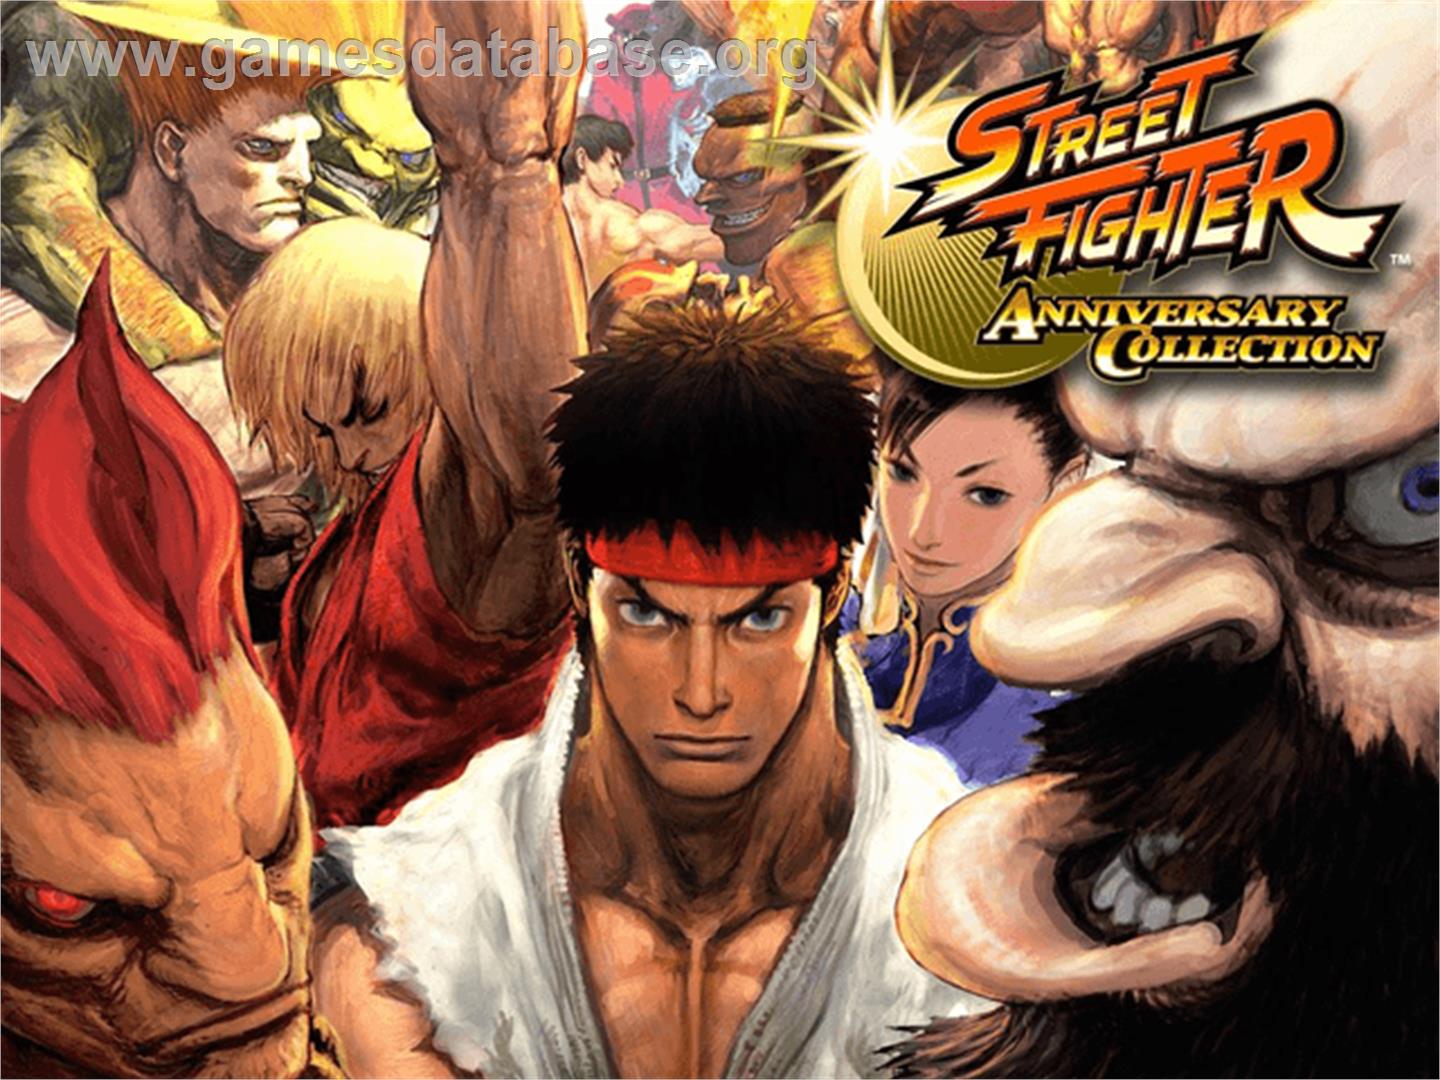 Street Fighter: Anniversary Collection - Microsoft Xbox - Artwork - Title Screen